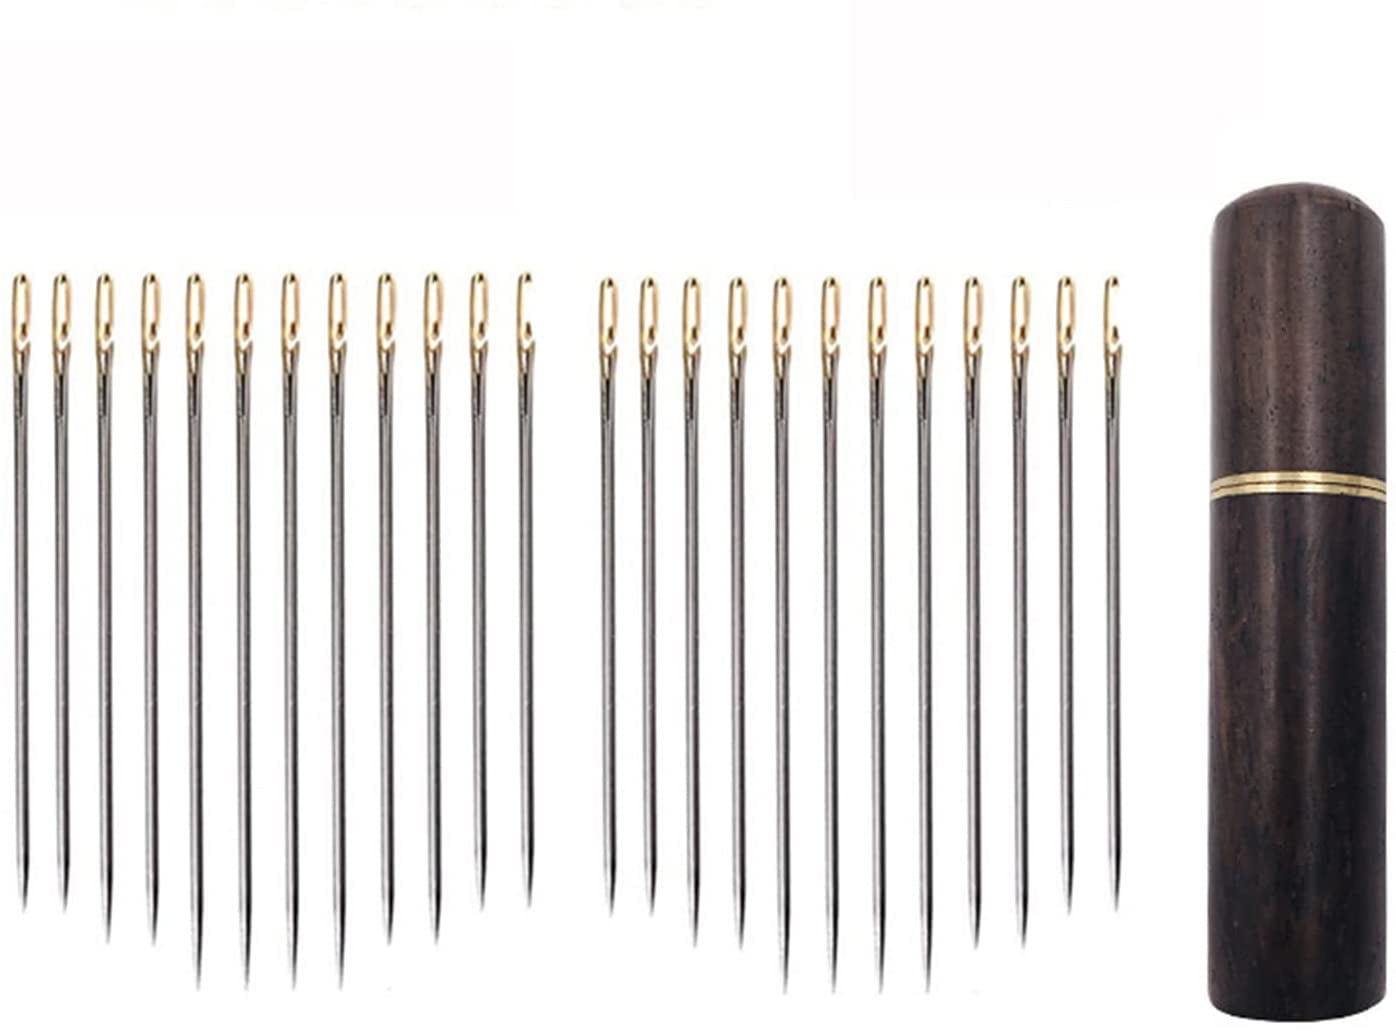  24 Pieces Self Threading Needles Easy Threading Needles and 4  Pieces Large-Eye Hand Sewing Needles with 2 Pieces Wooden Needle Case for  Storing Handmade Sewing Embroidery Needle Accessories